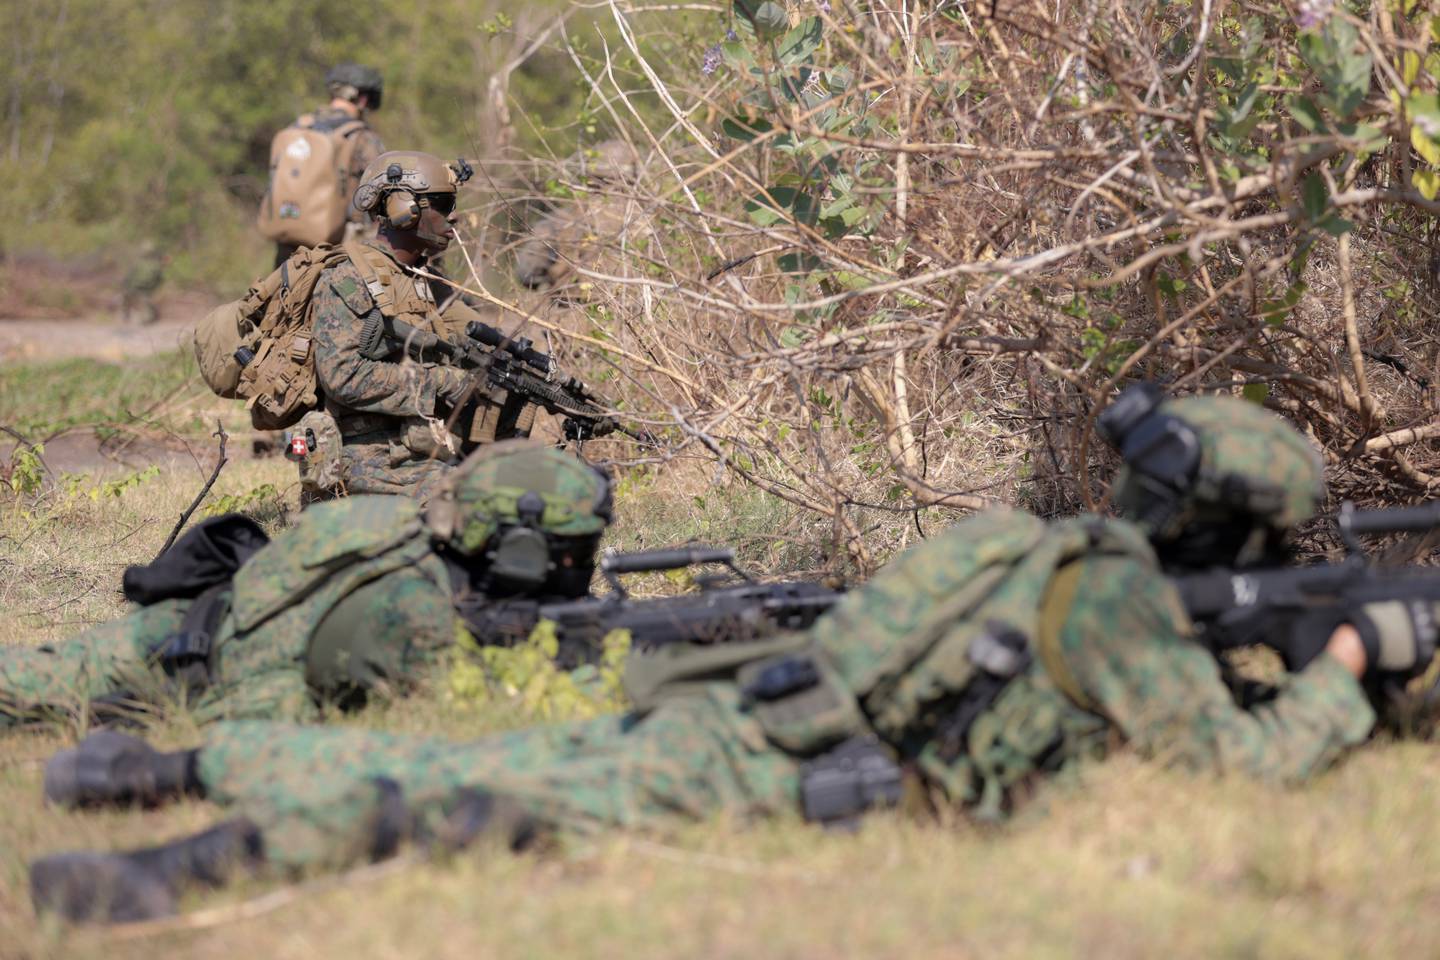 A U.S. Marine and and Singaporean soldiers take their positions during an amphibious landing operation at the Super Garuda Shield multi-national military exercise in Situbondo, East Java, Indonesia, Sunday, Sept. 10, 2023.